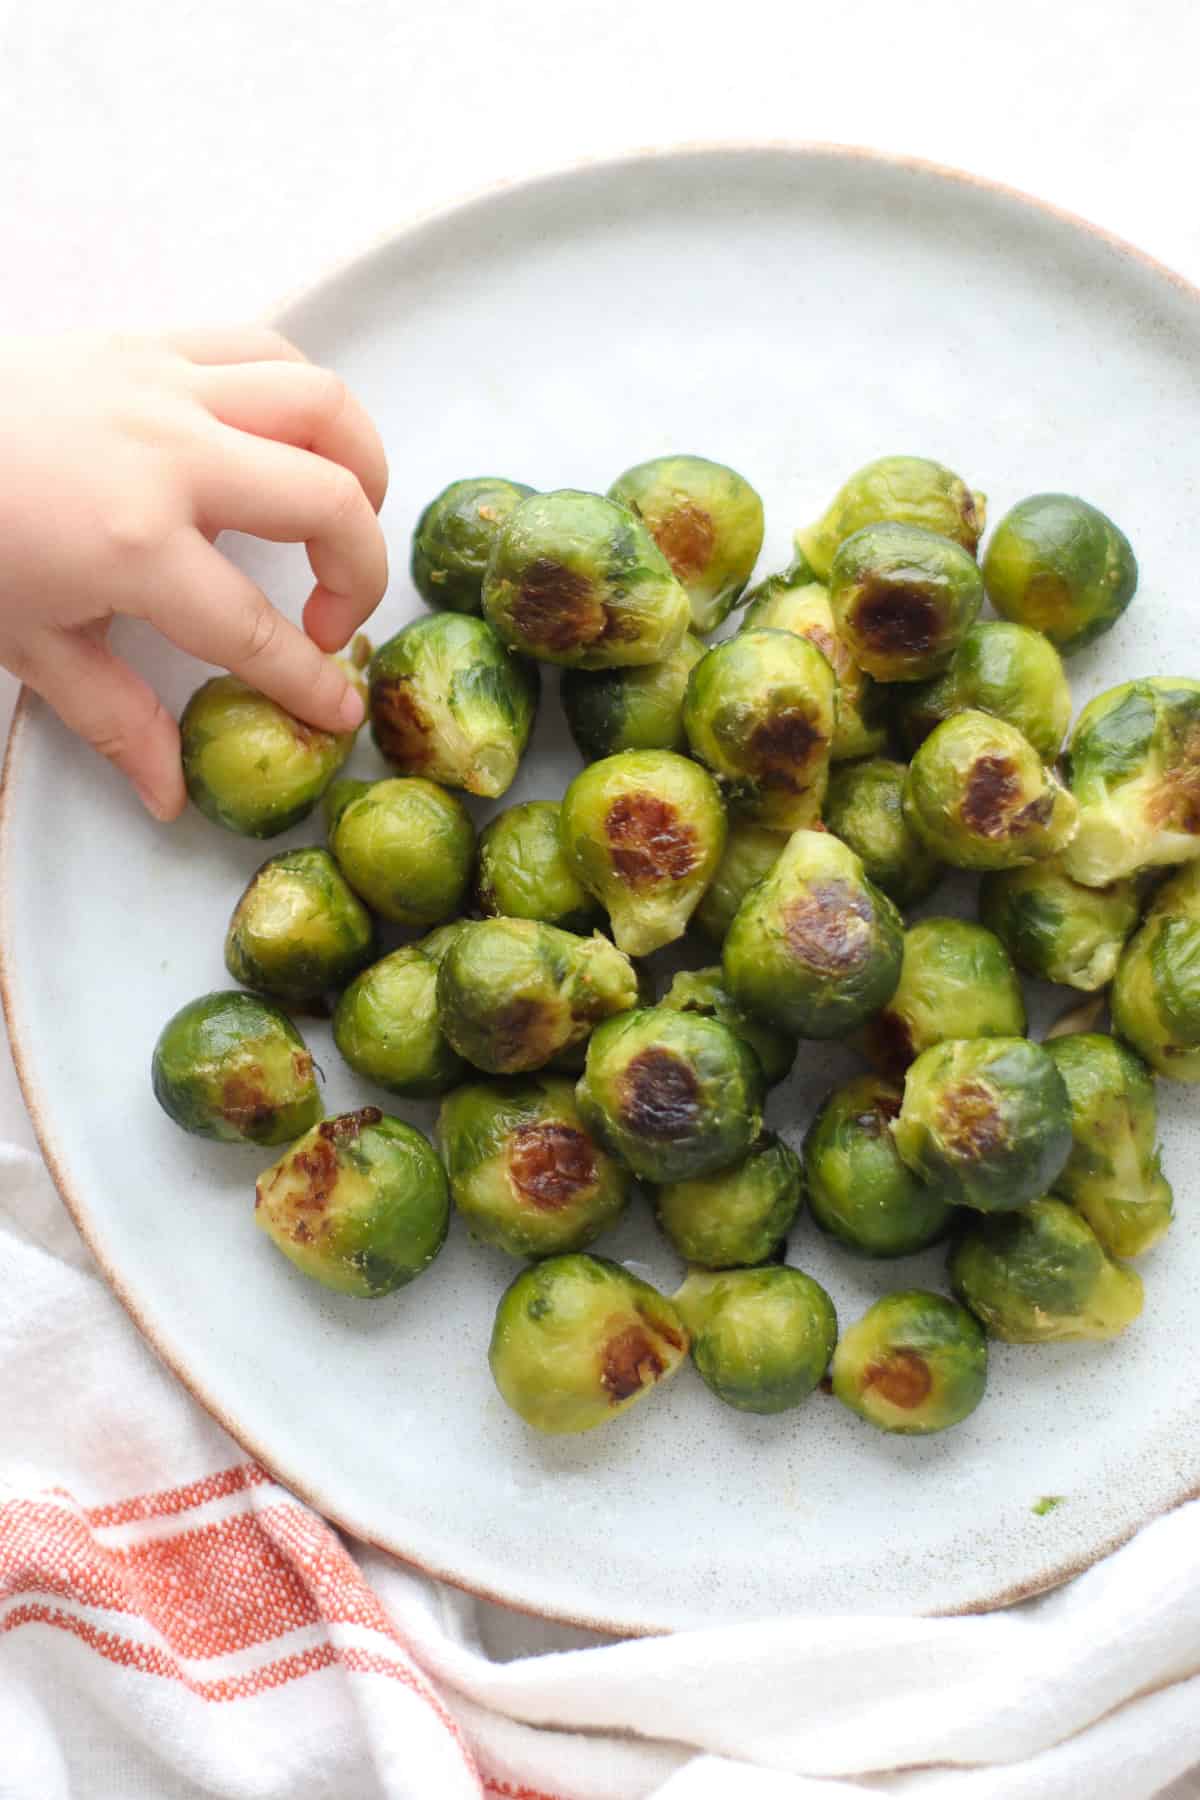 Roasted frozen Brussels sprouts on a plate with a baby's hand grabbing one.